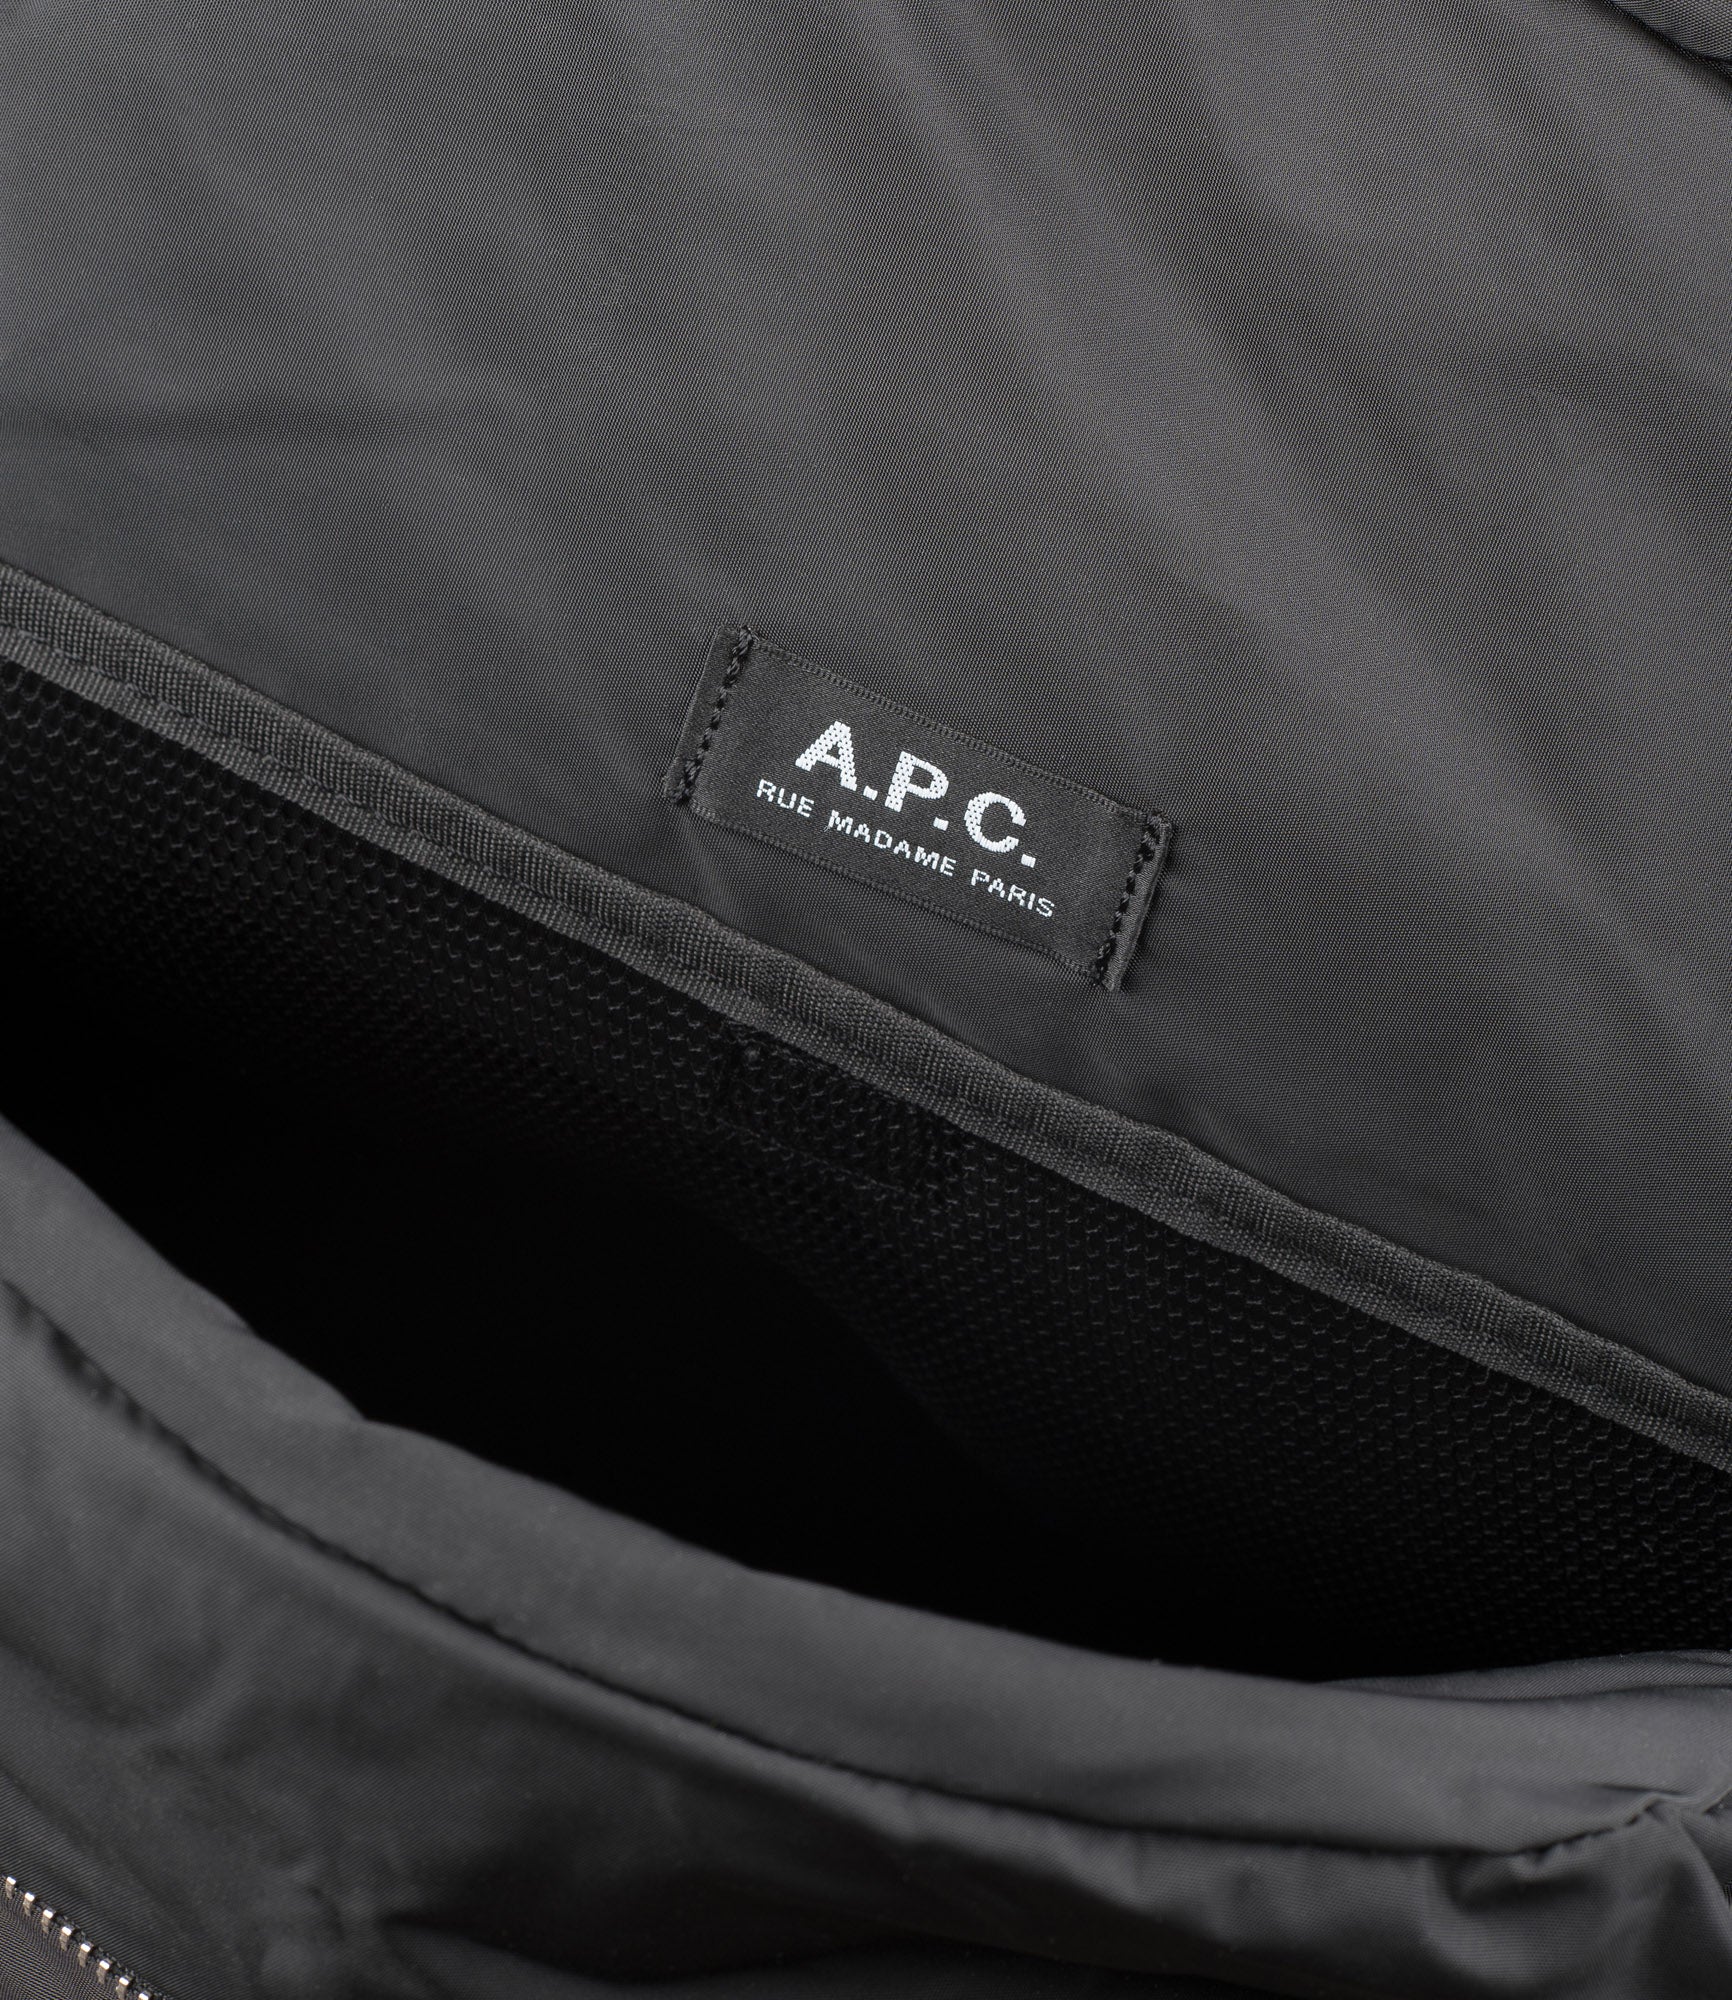 Repeat Active Backpack